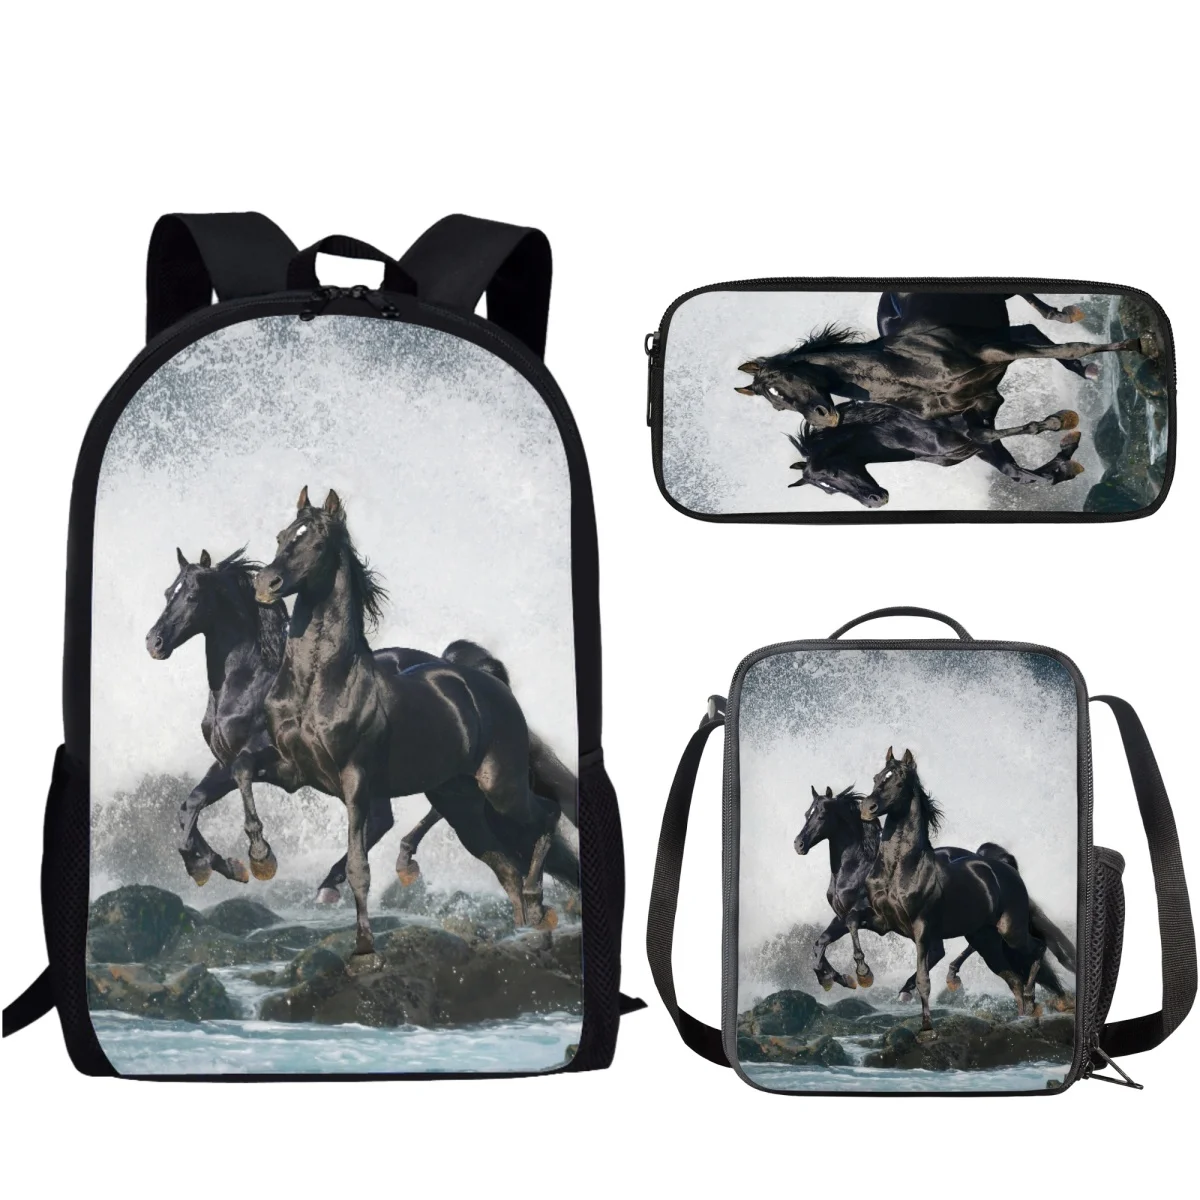 3d-carzy-horse-set-of-3-school-bag-for-children-schoolbag-large-capacity-backpack-with-lunch-boxes-girls-boys-mochila-book-bags